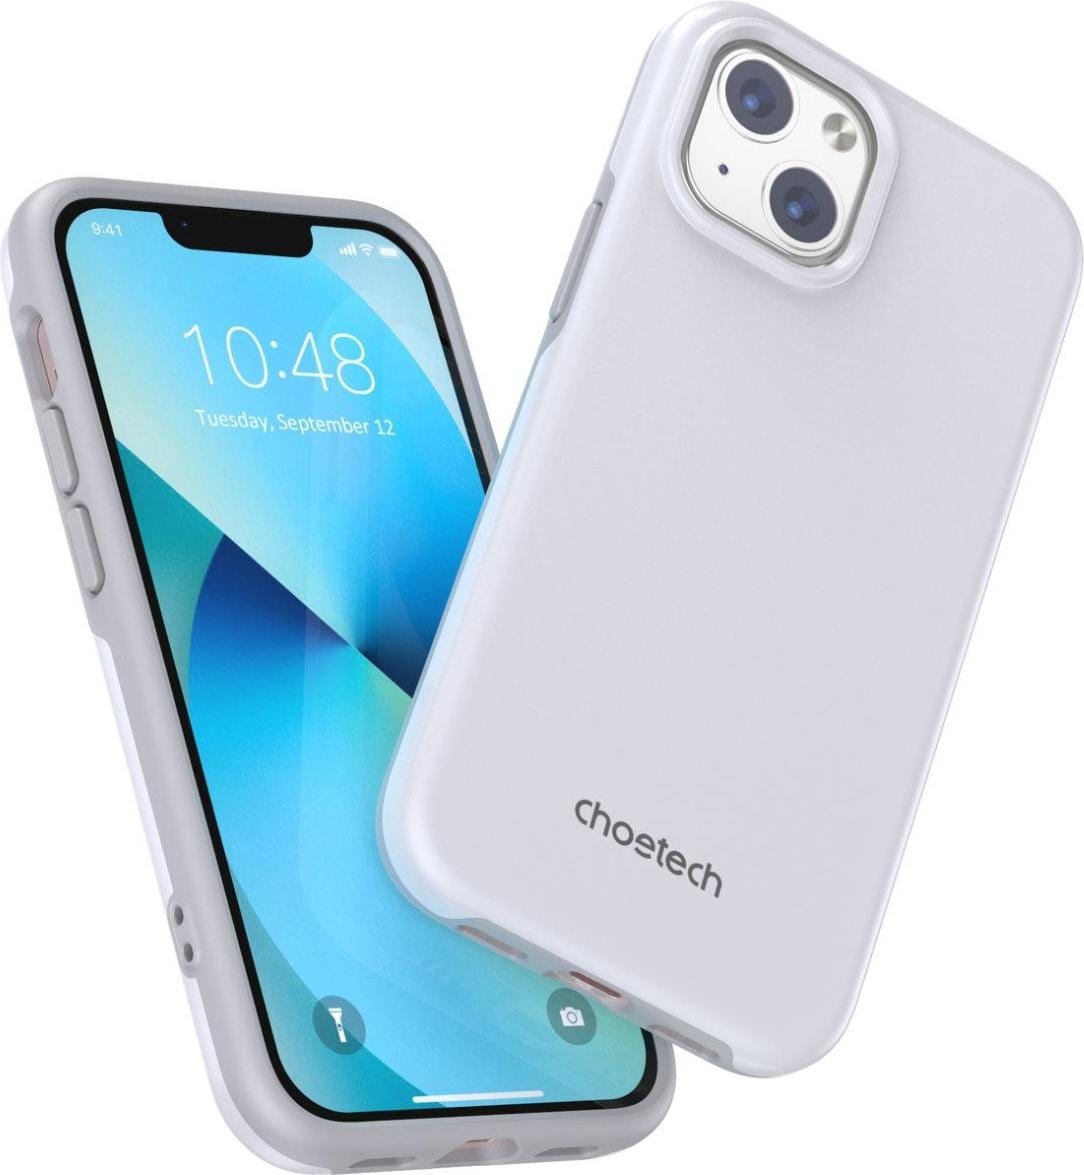 Choetech PC0112-MFM-WH iPhone13 MFM PC + TPU phone case, 6.1 inches, white (iPhone 13), Smartphone Hülle, Weiss